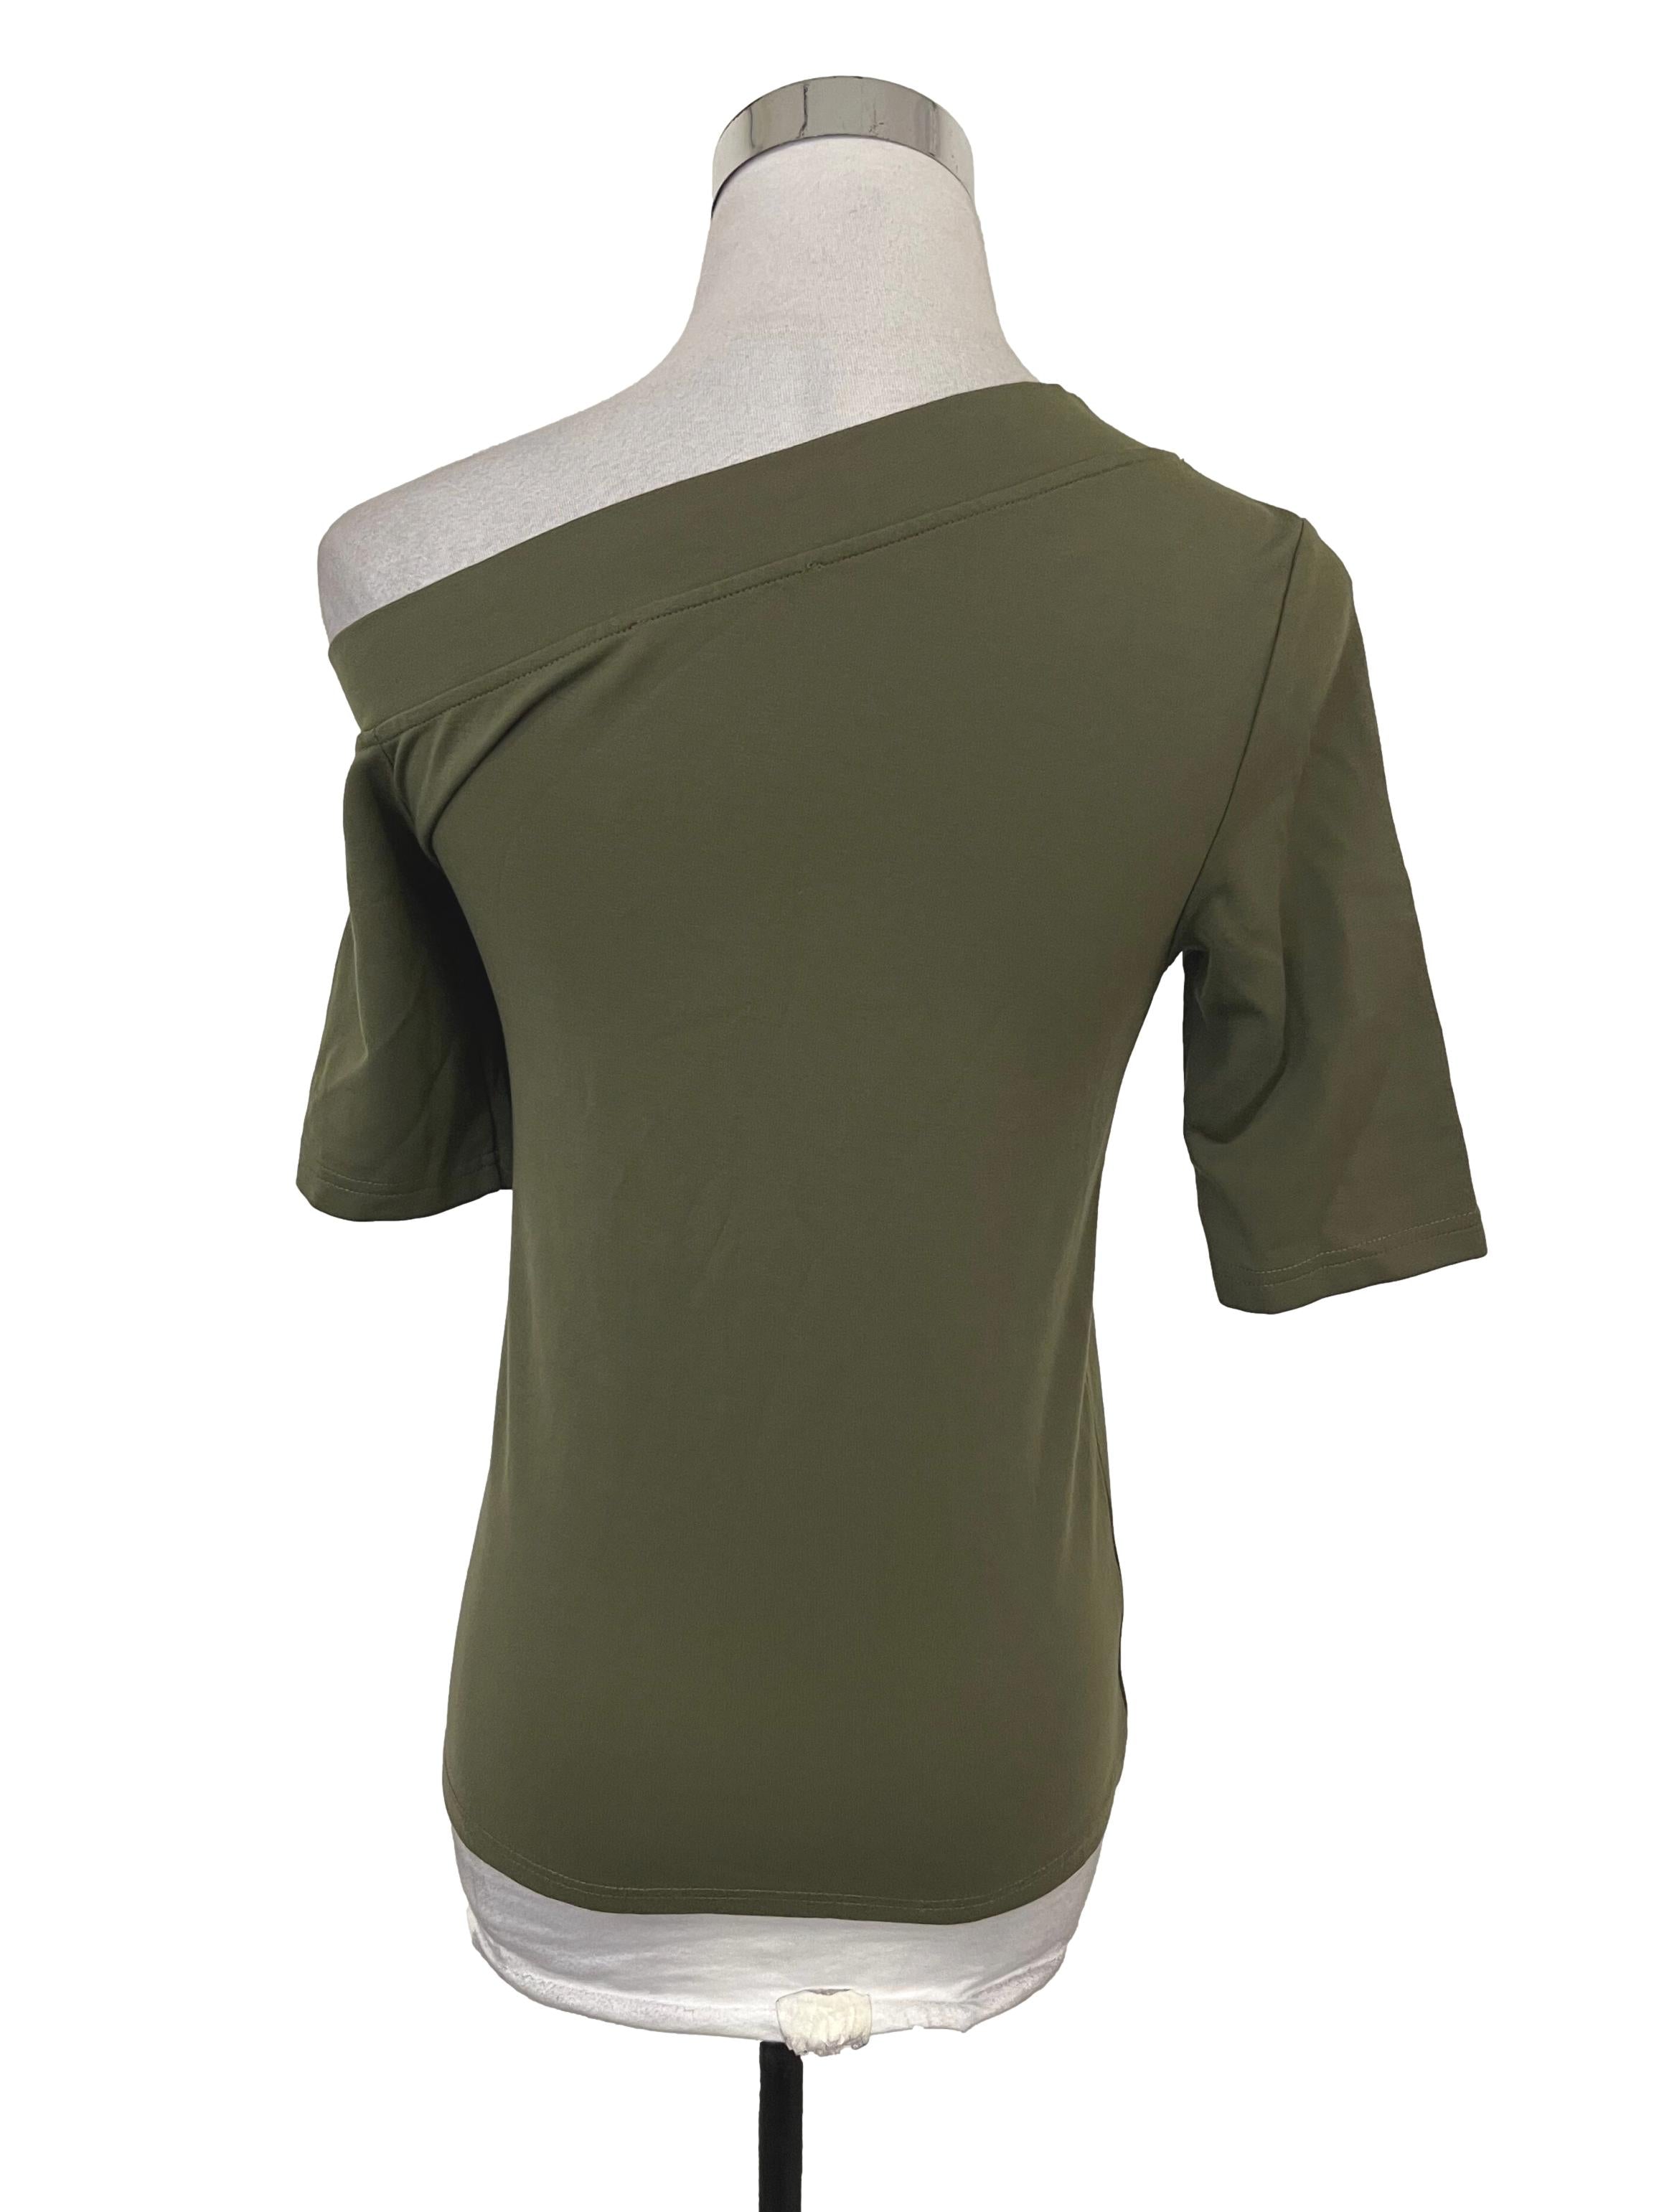 Army Green Asymertrical Long Sleeves Top